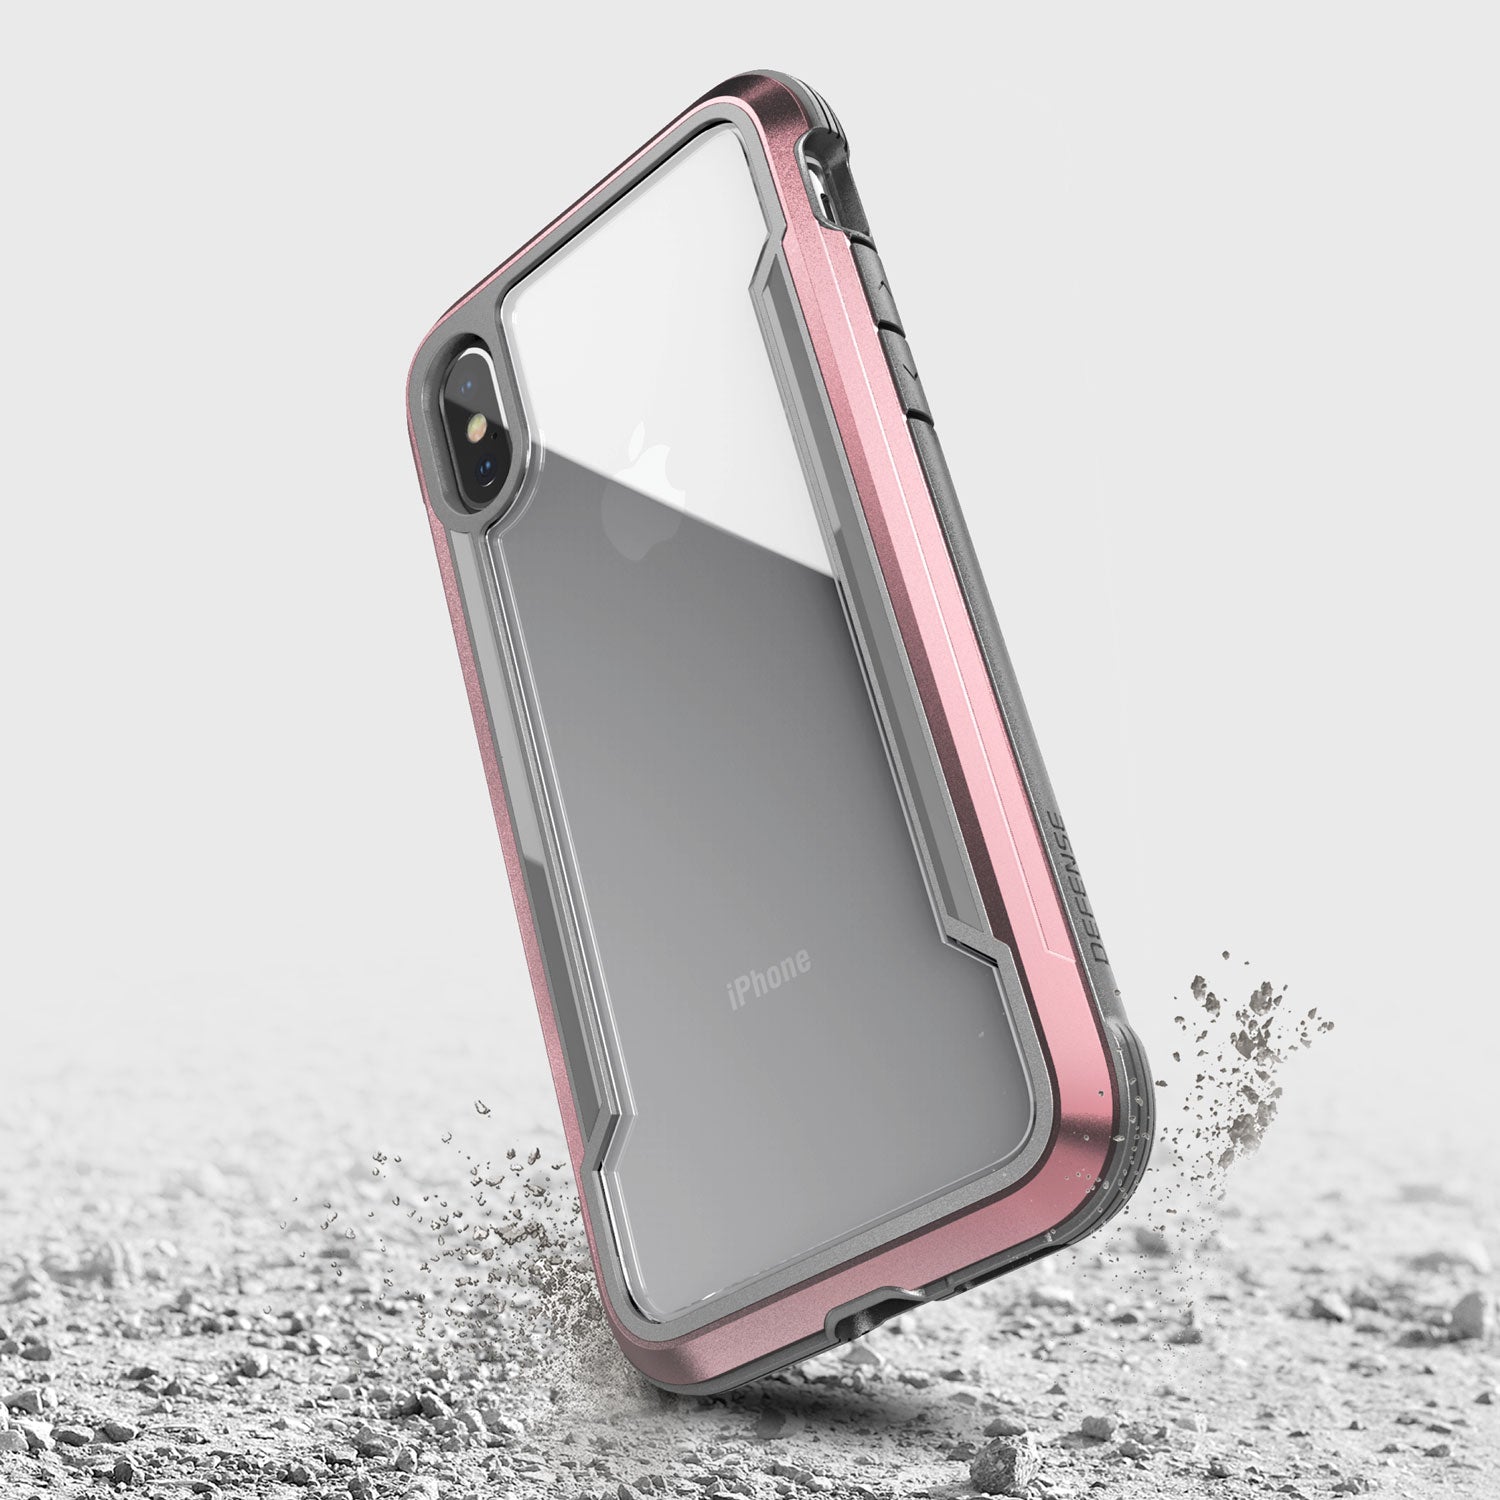 The iPhone XS Max Case - SHIELD by Raptic in pink and grey offers drop protection.